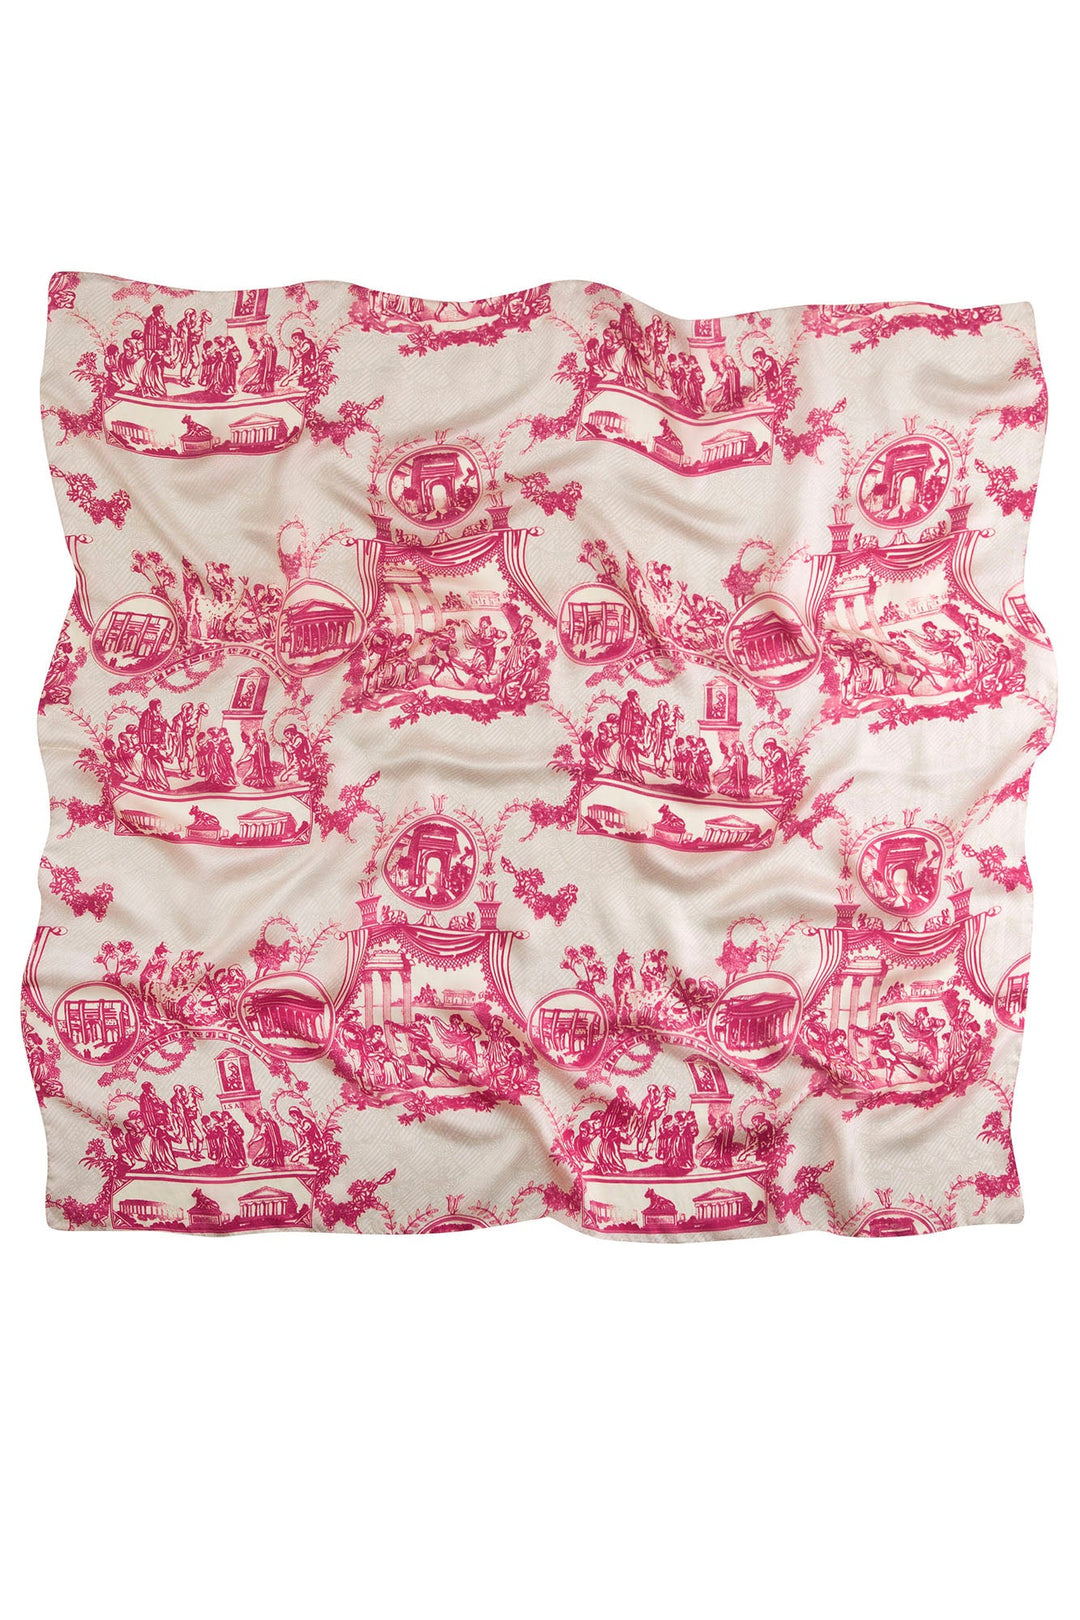 The Ancient Columns Pink print scarf is inspired by classic French Toile De Jouy fabrics.